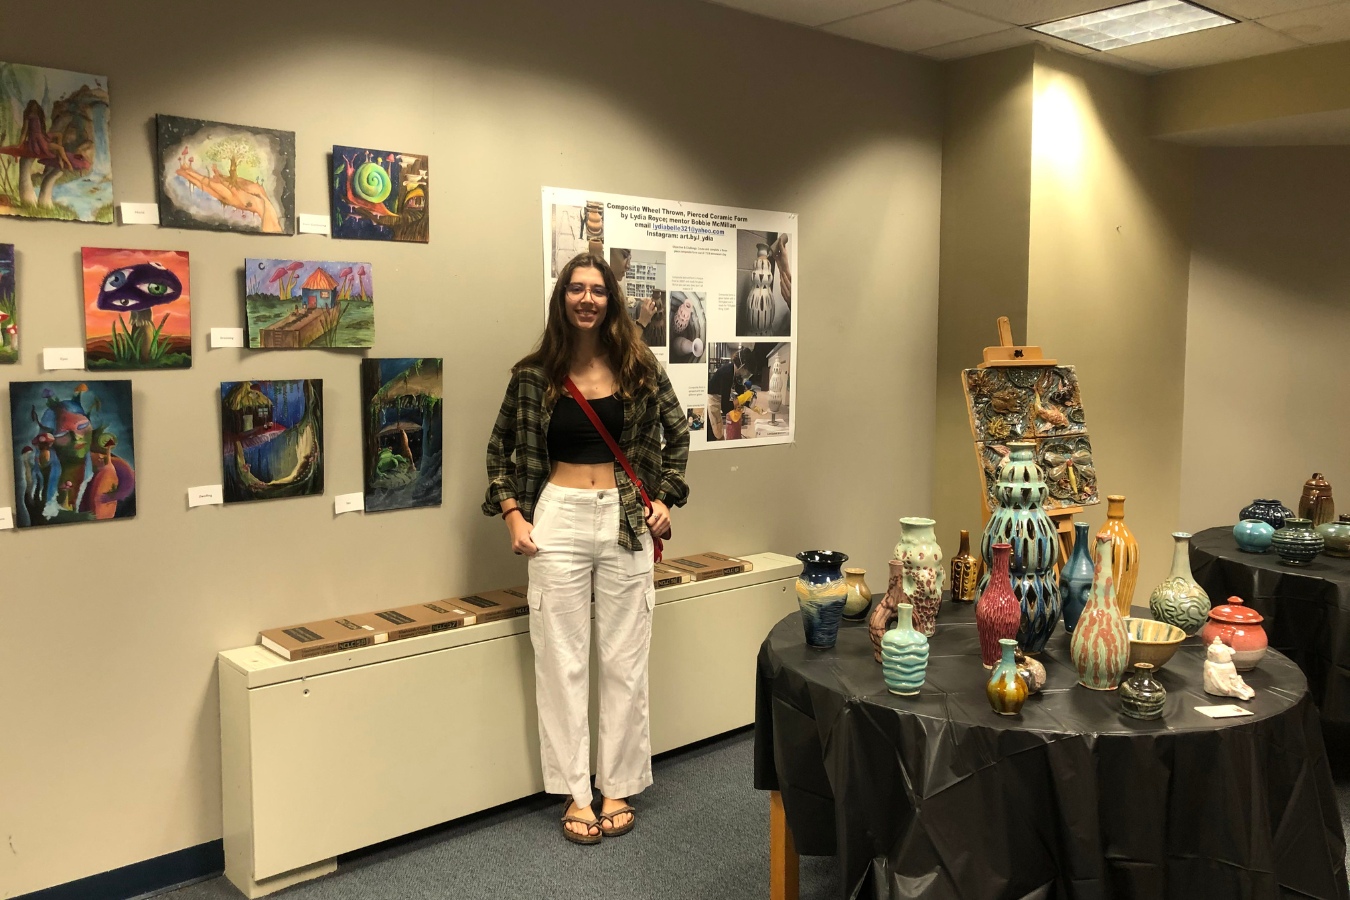 Student posed with artwork at a community gallery on campus